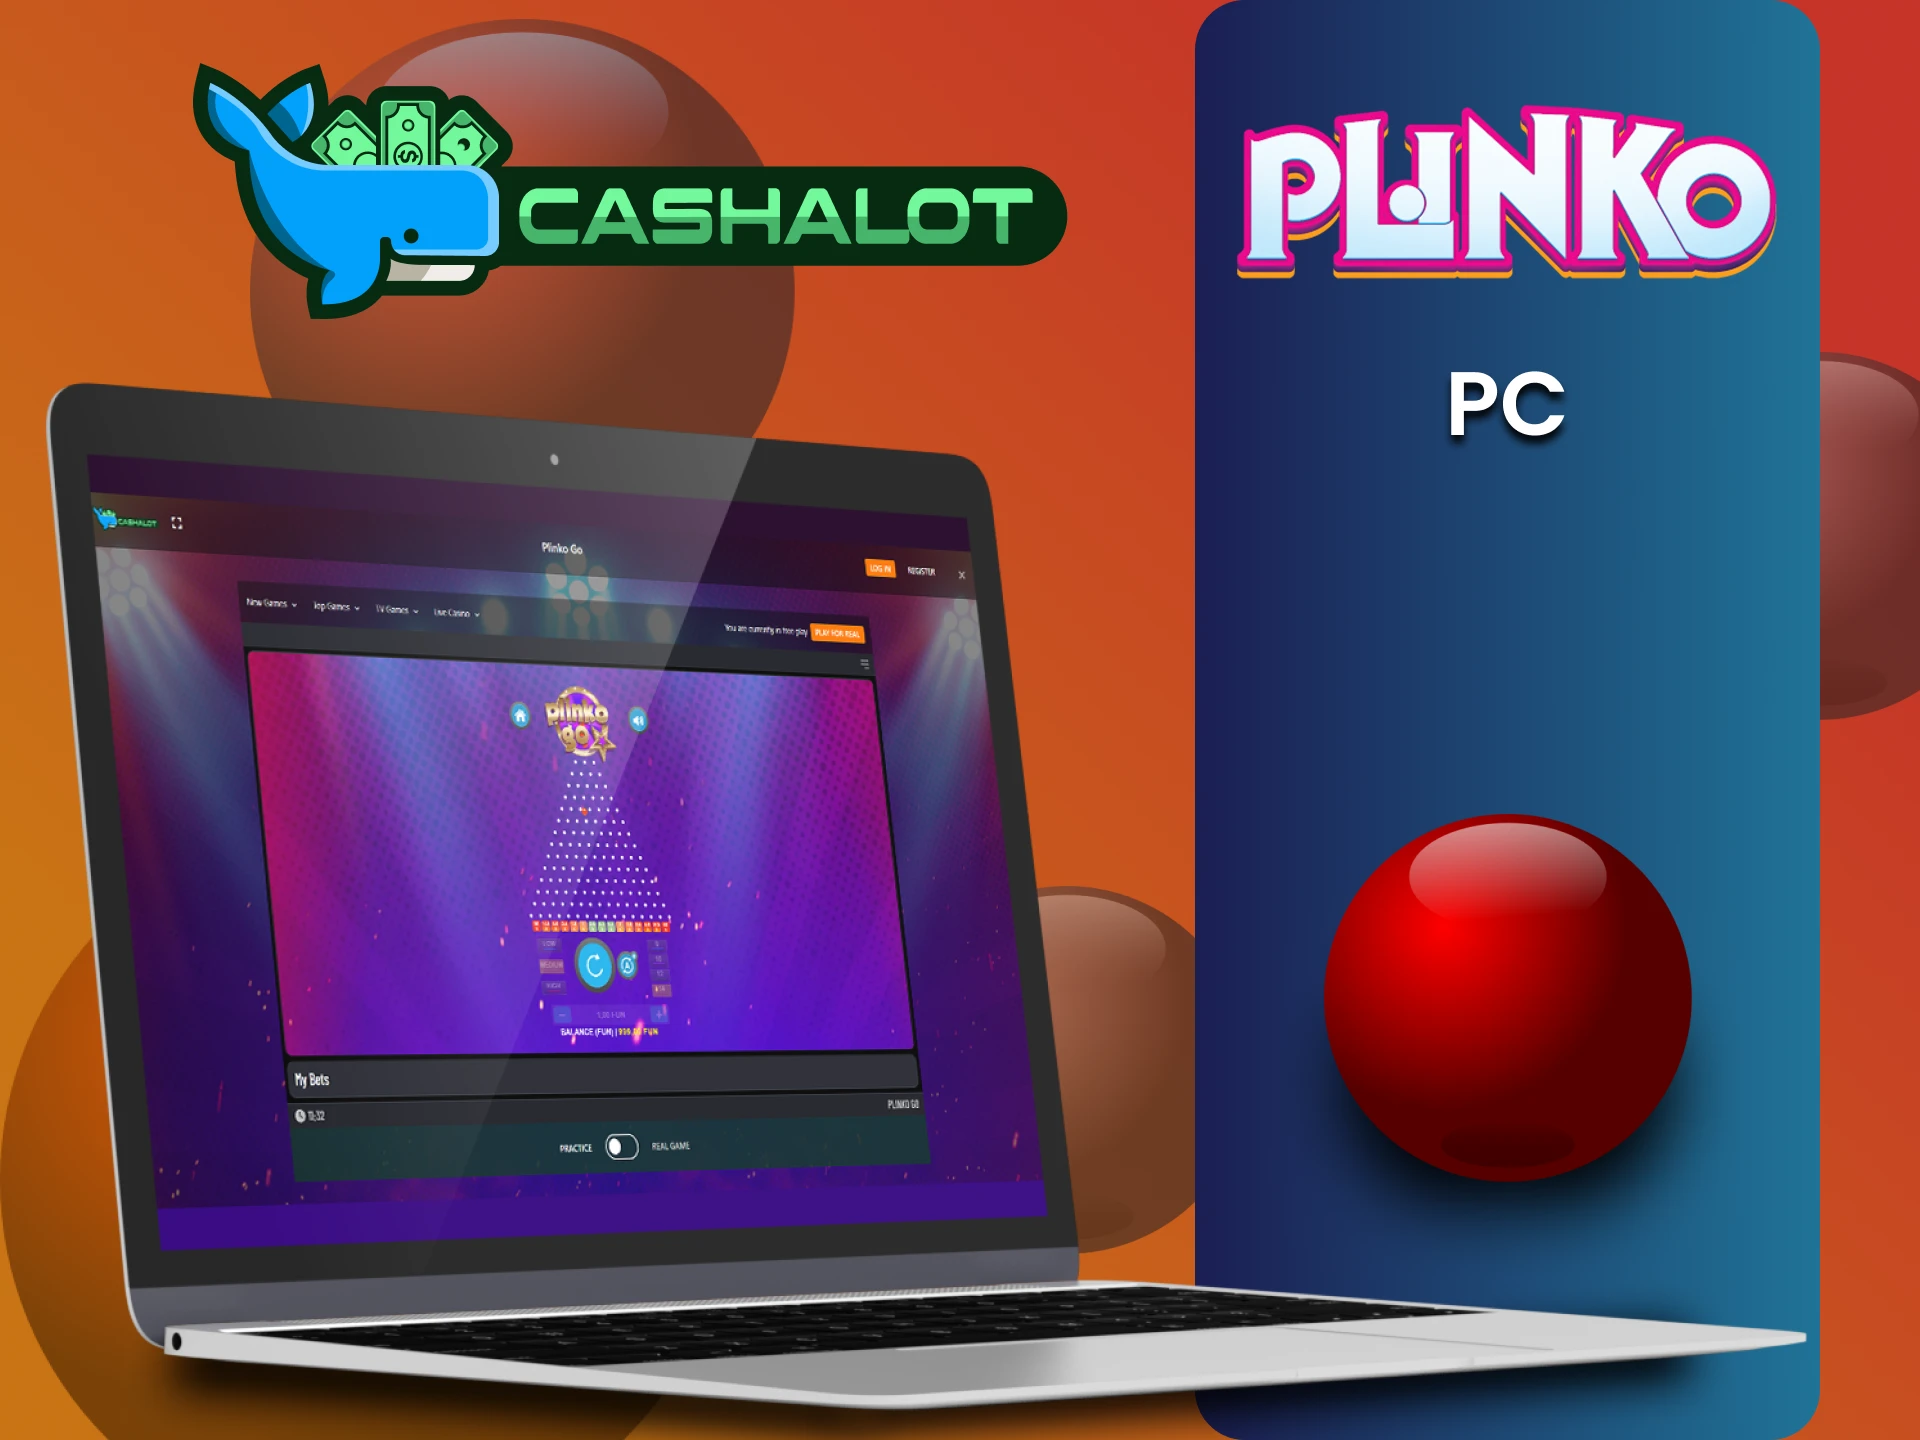 You can play Plinko via PC on the Cashalot website.